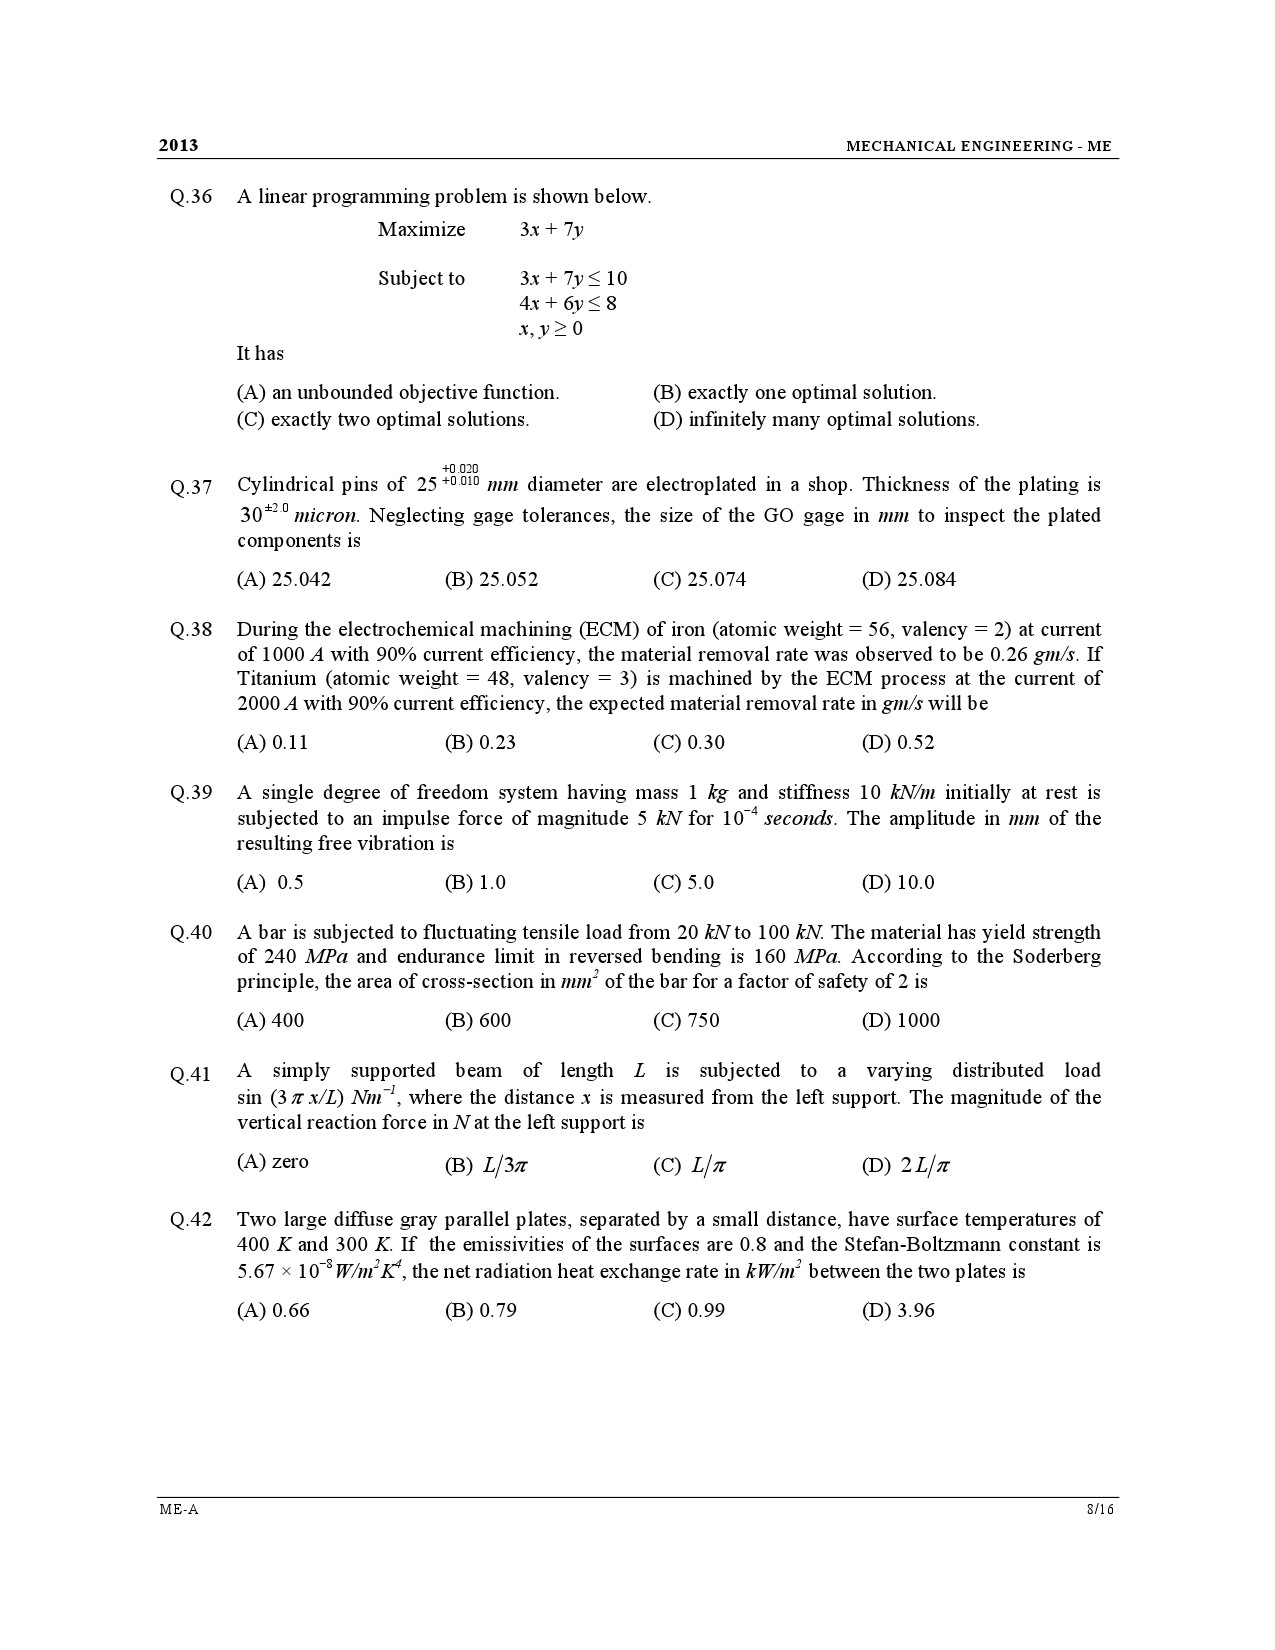 GATE Exam Question Paper 2013 Mechanical Engineering 8